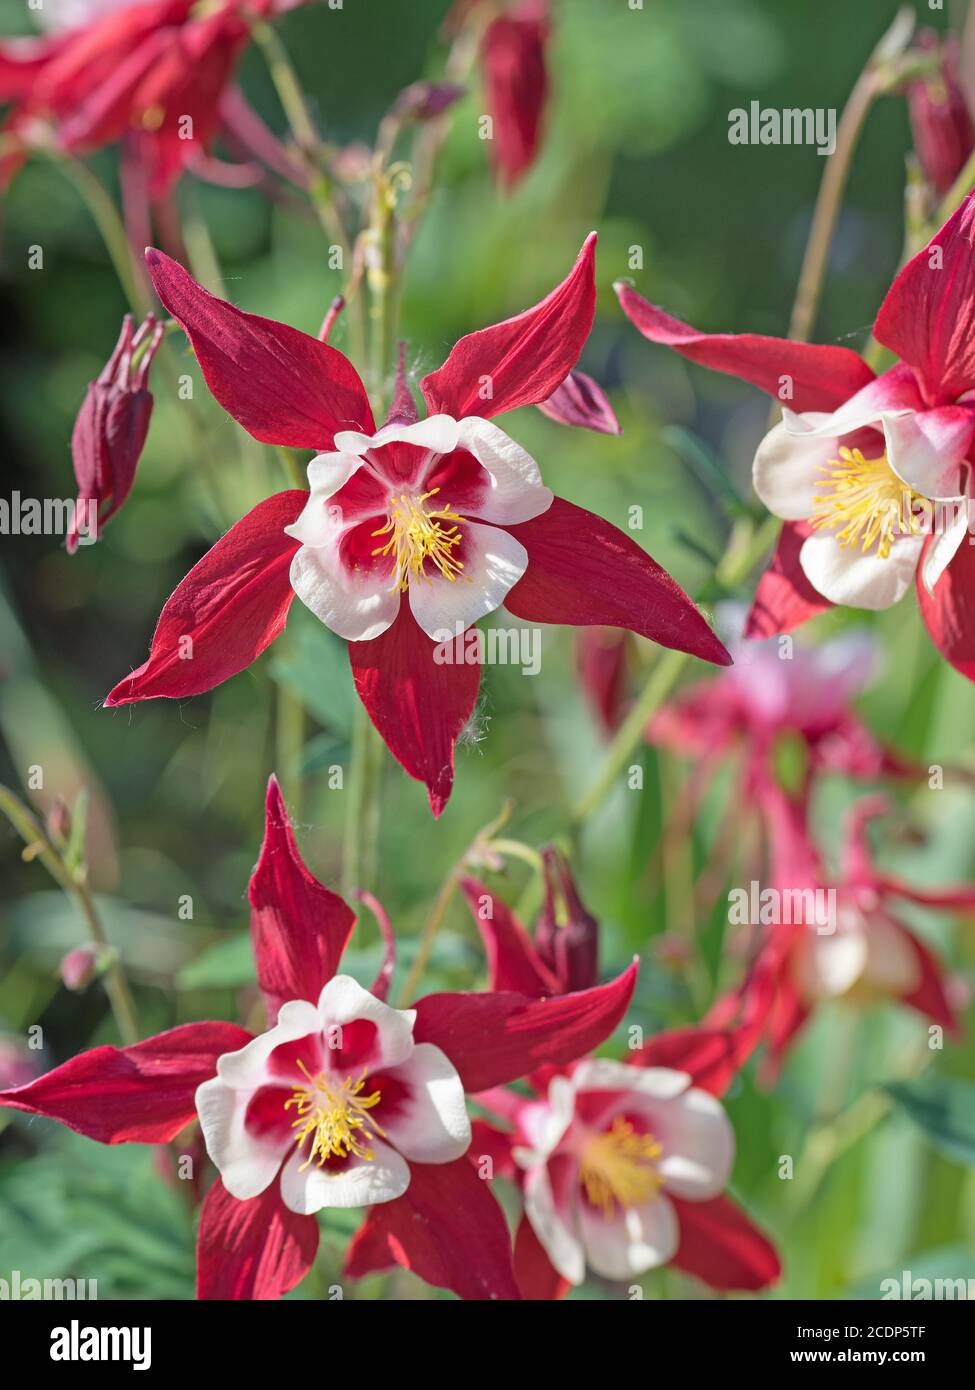 Blooming red columbine in the garden Stock Photo